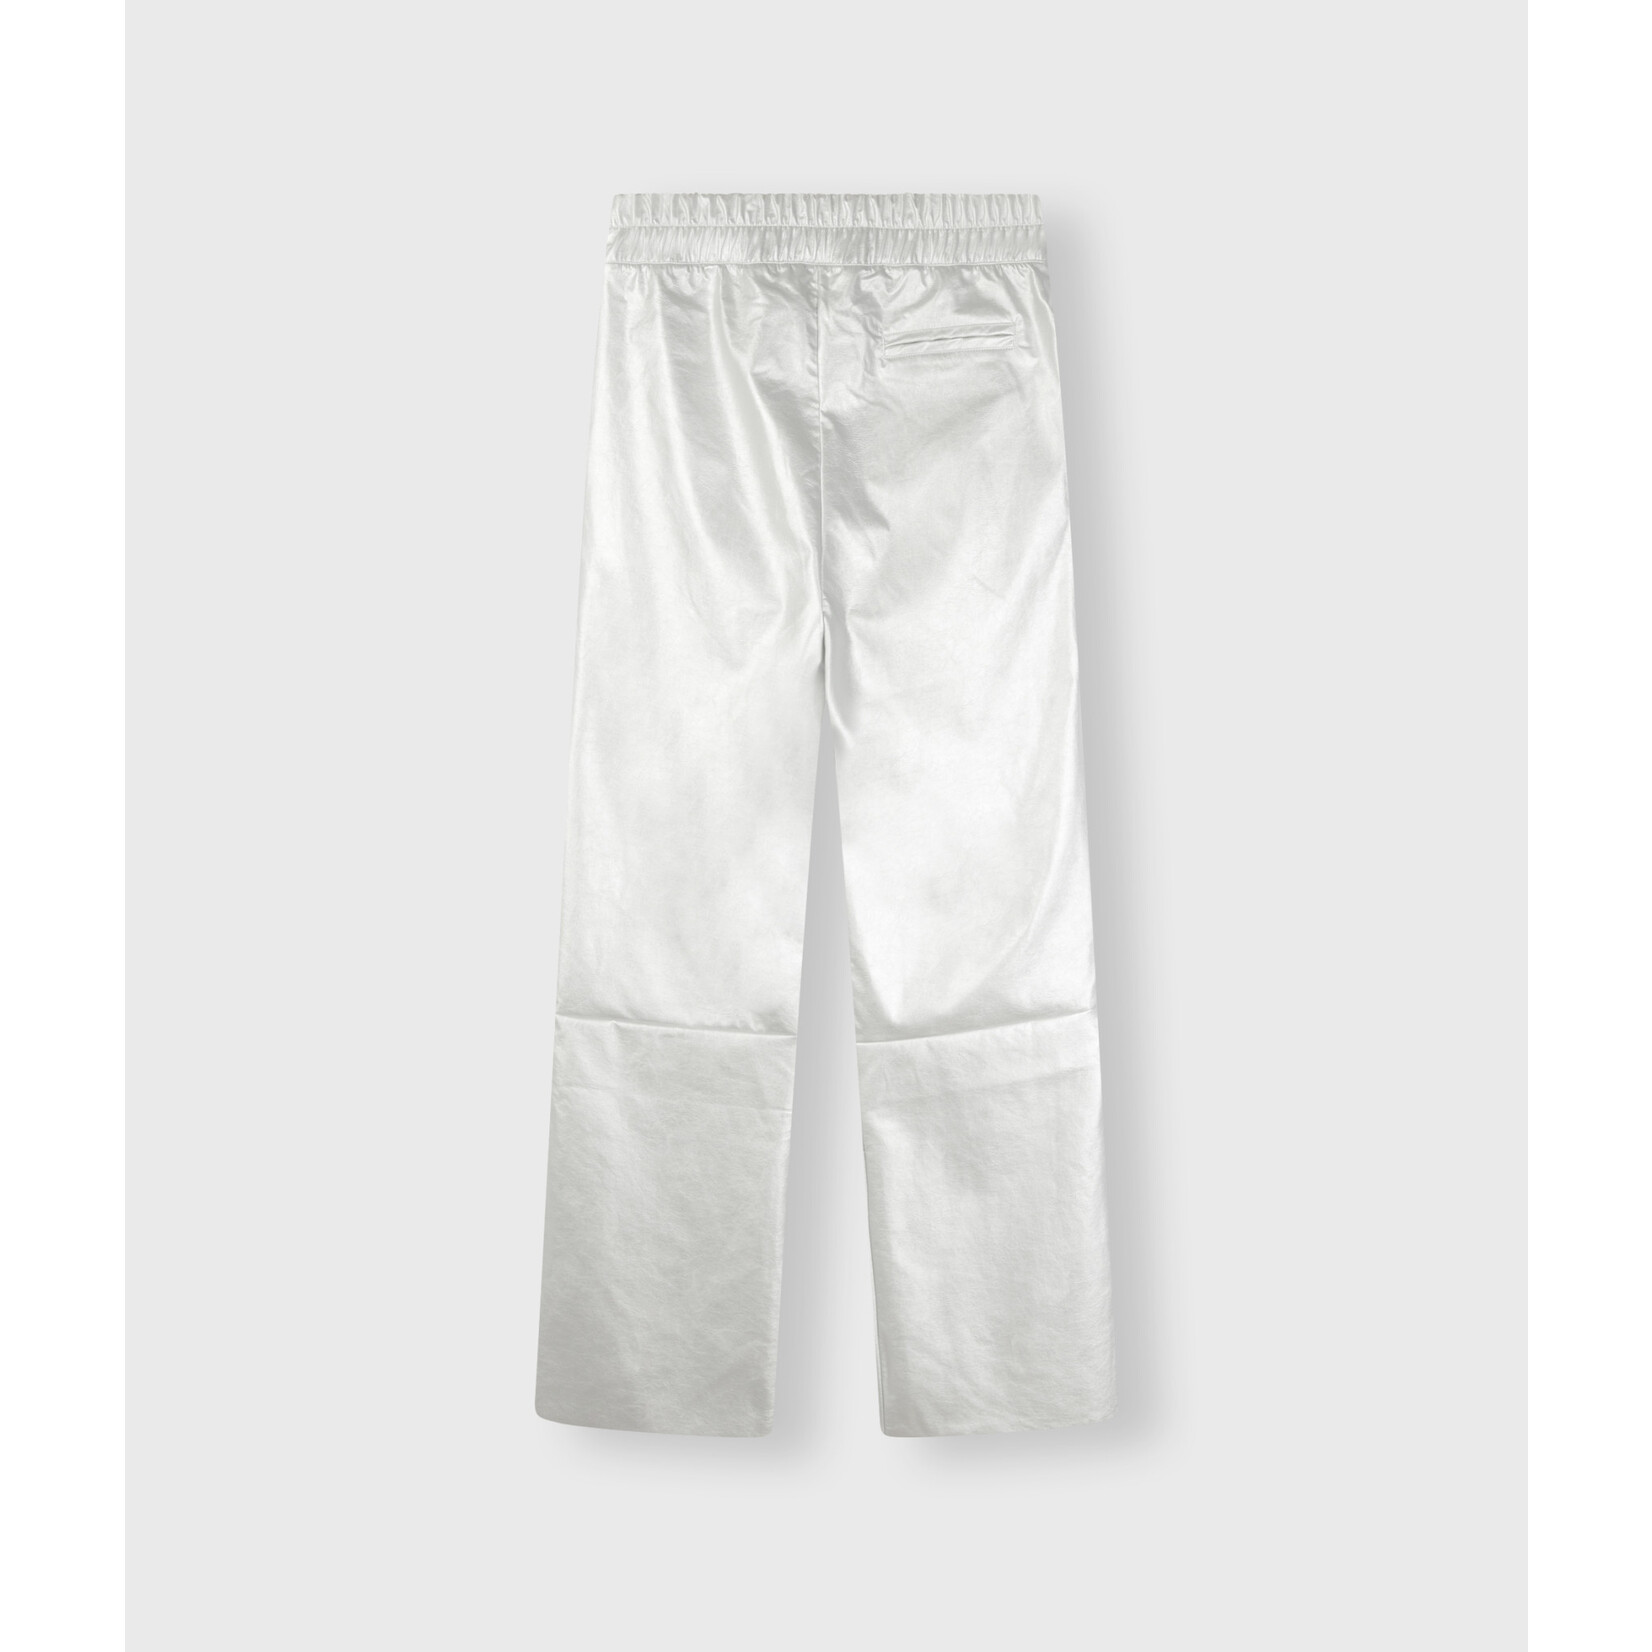 10Days Flared pants leather look Silver